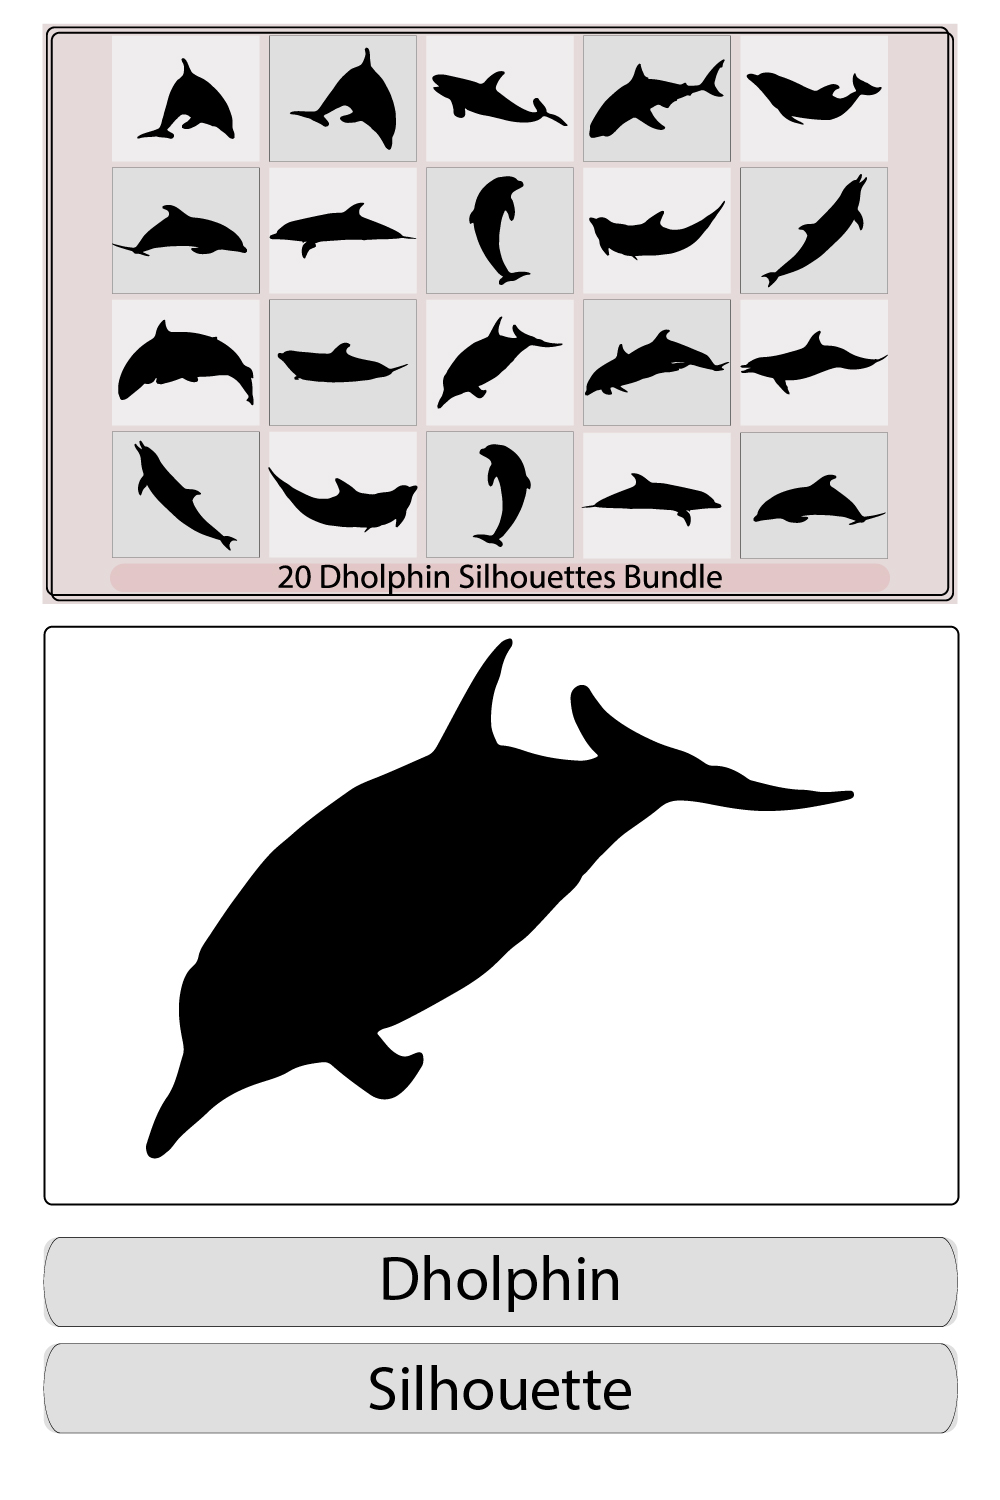 Dolphin Silhouettes,Dolphins graphic icons set Silhouette,Vector set of black silhouettes of dolphins pinterest preview image.